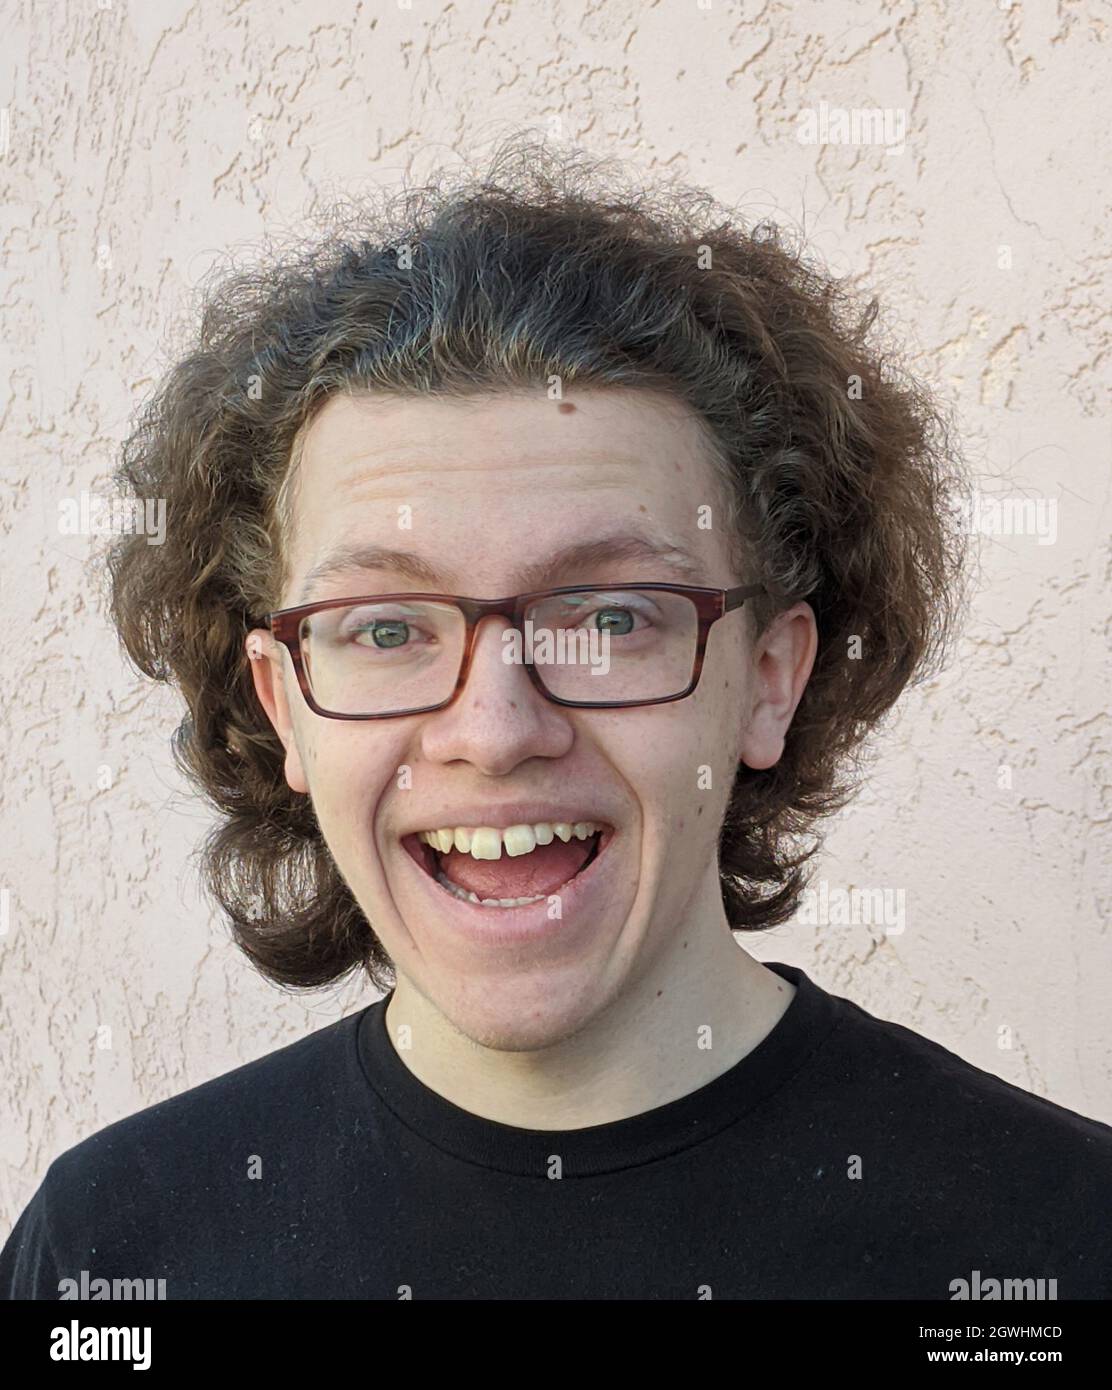 Portrait Of Smiling Teenage Boy With Curly Hair And Glasses Against Wall  Stock Photo - Alamy